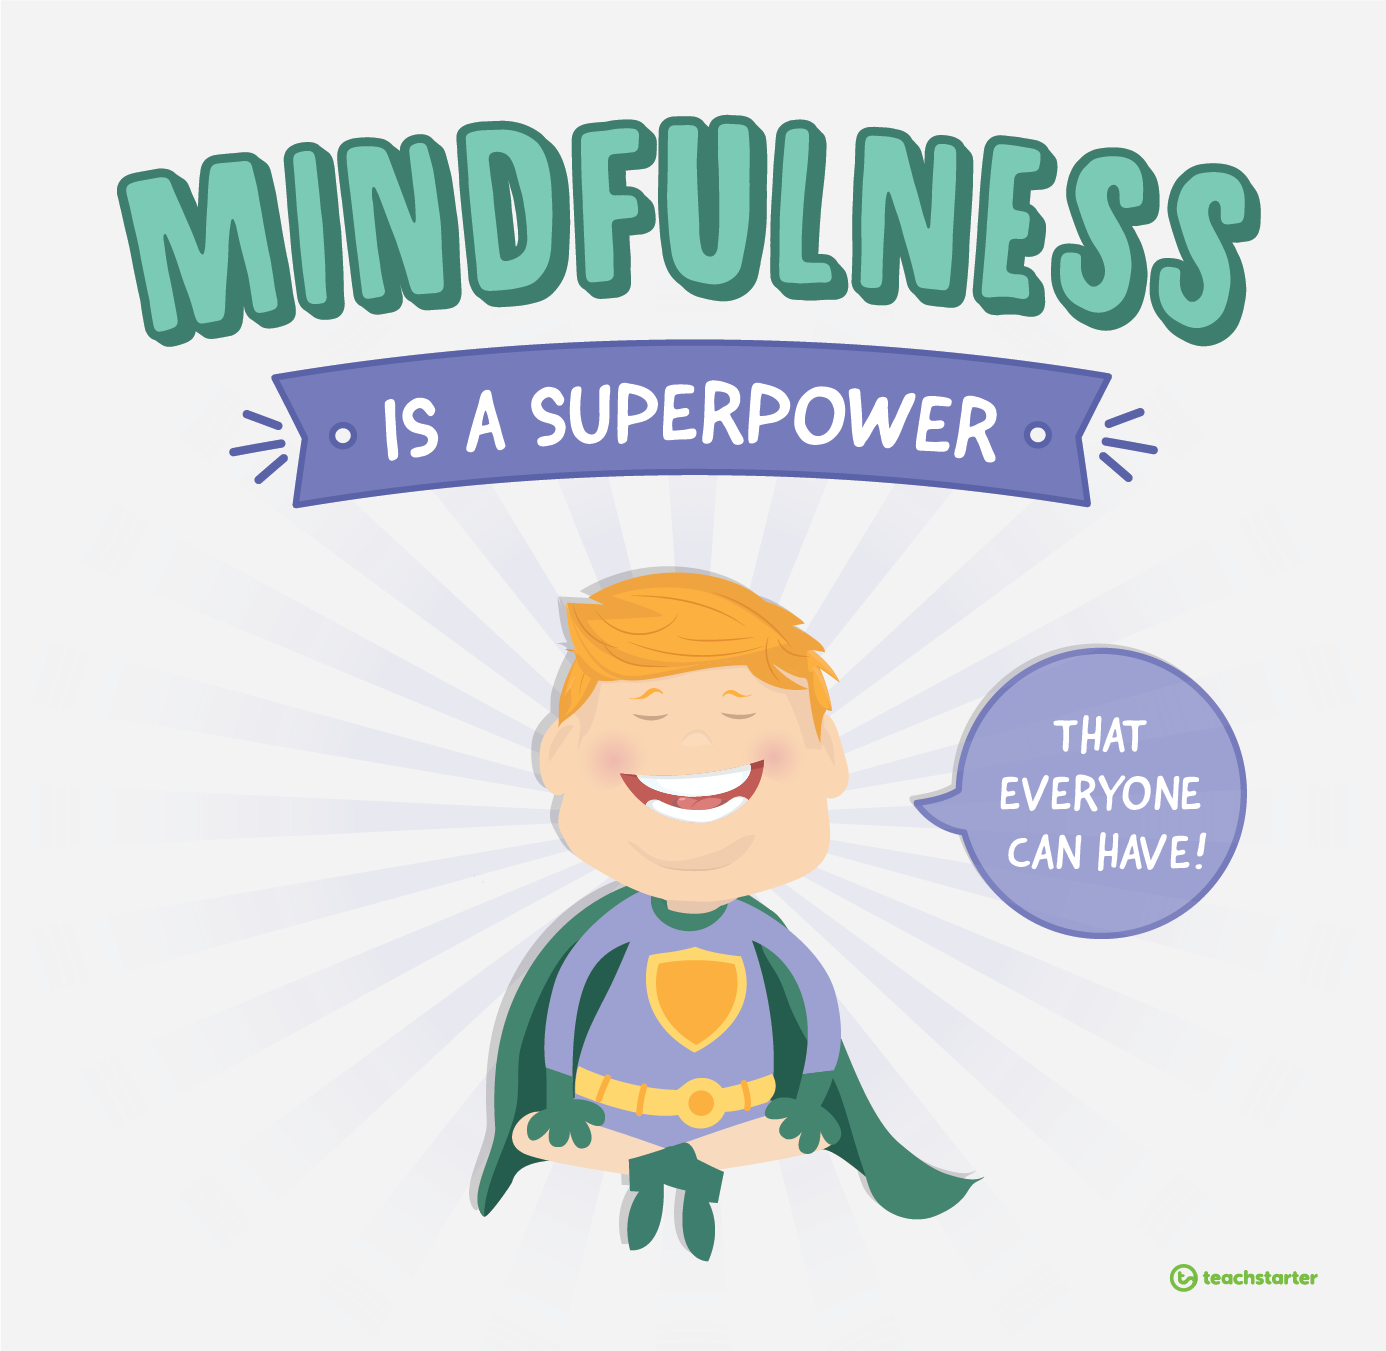 mindfulness is a superpower that everyone can have!